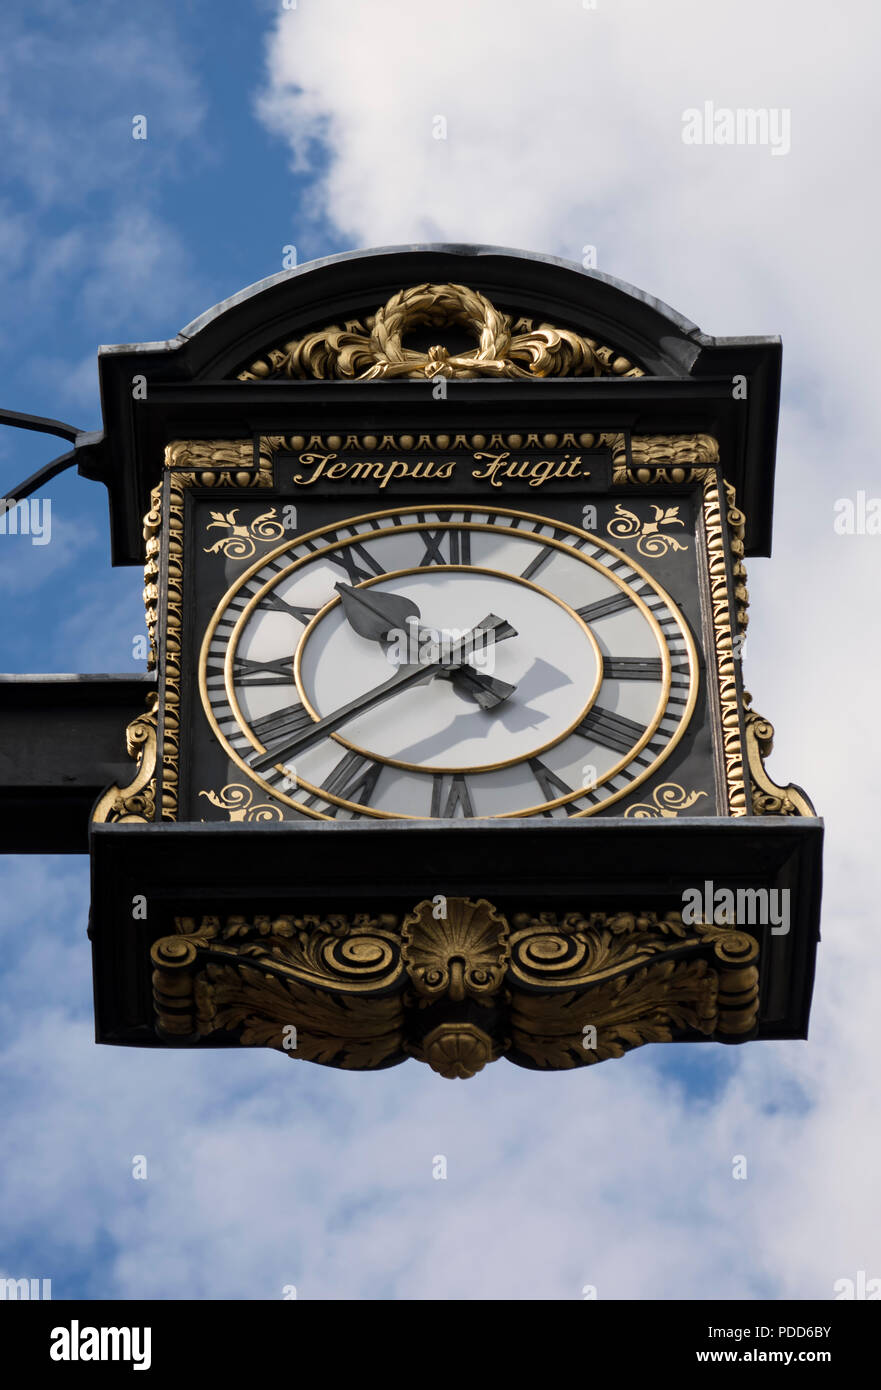 hanging clock outside the 1908 chelsea old town hall, chelsea, london, england, with latin inscription tempus fugit, or time flies Stock Photo